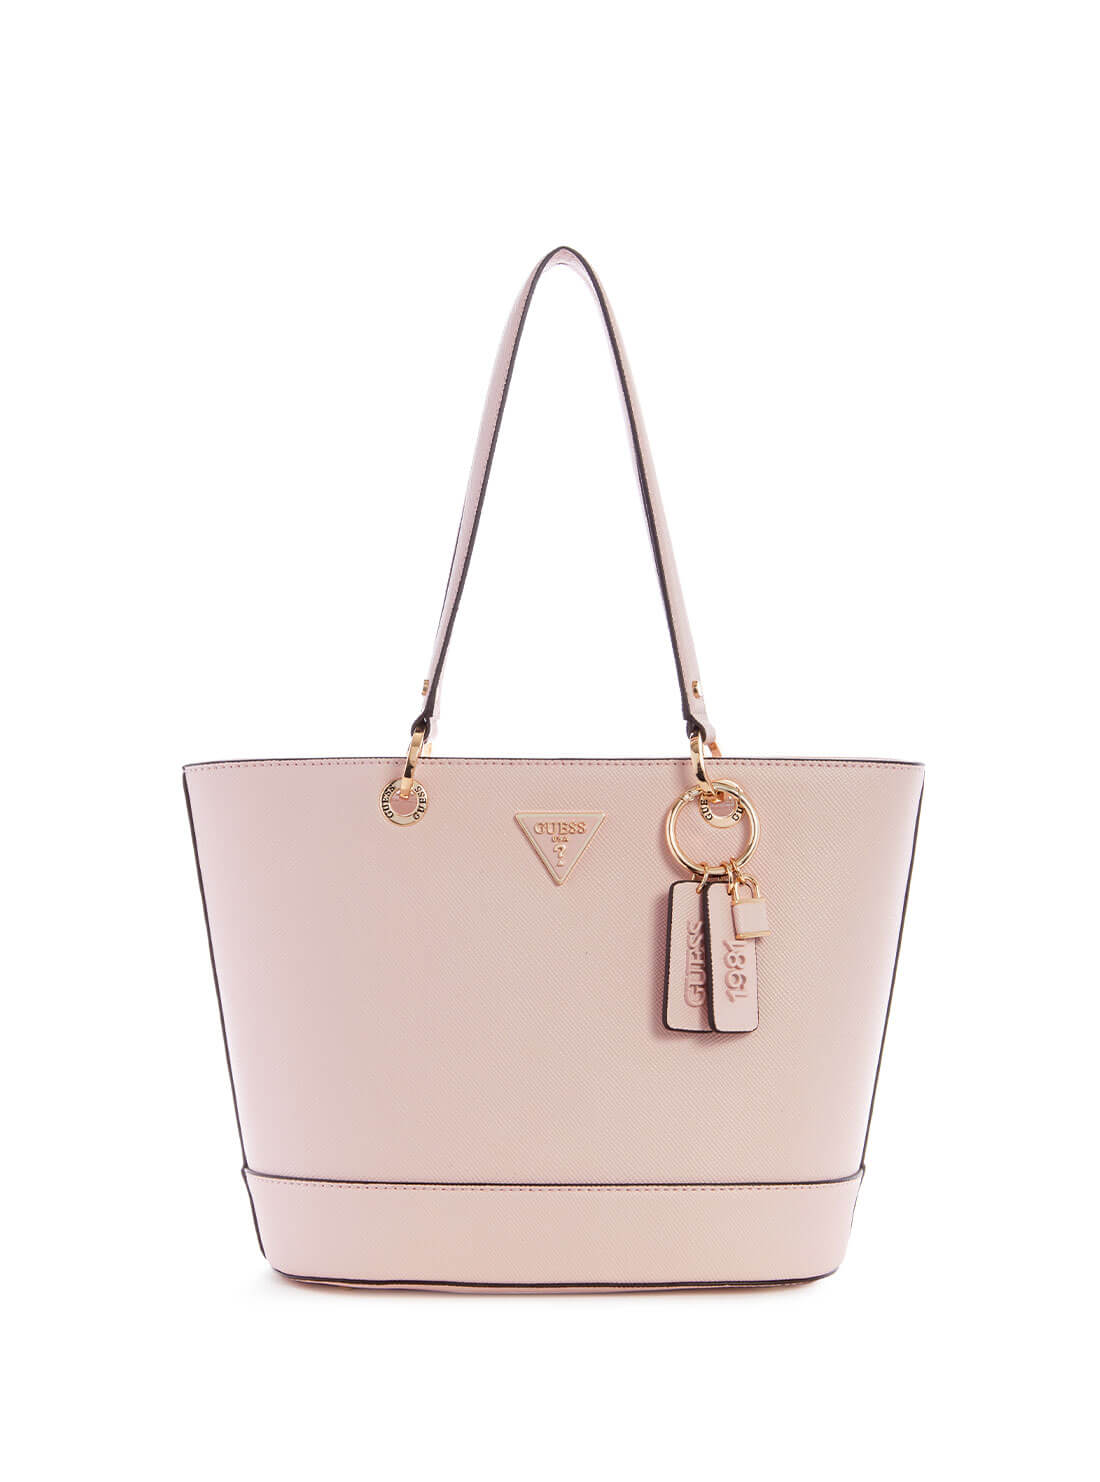 Light Pink Noelle Small Elite Tote Bag | GUESS Women's Handbags | front view